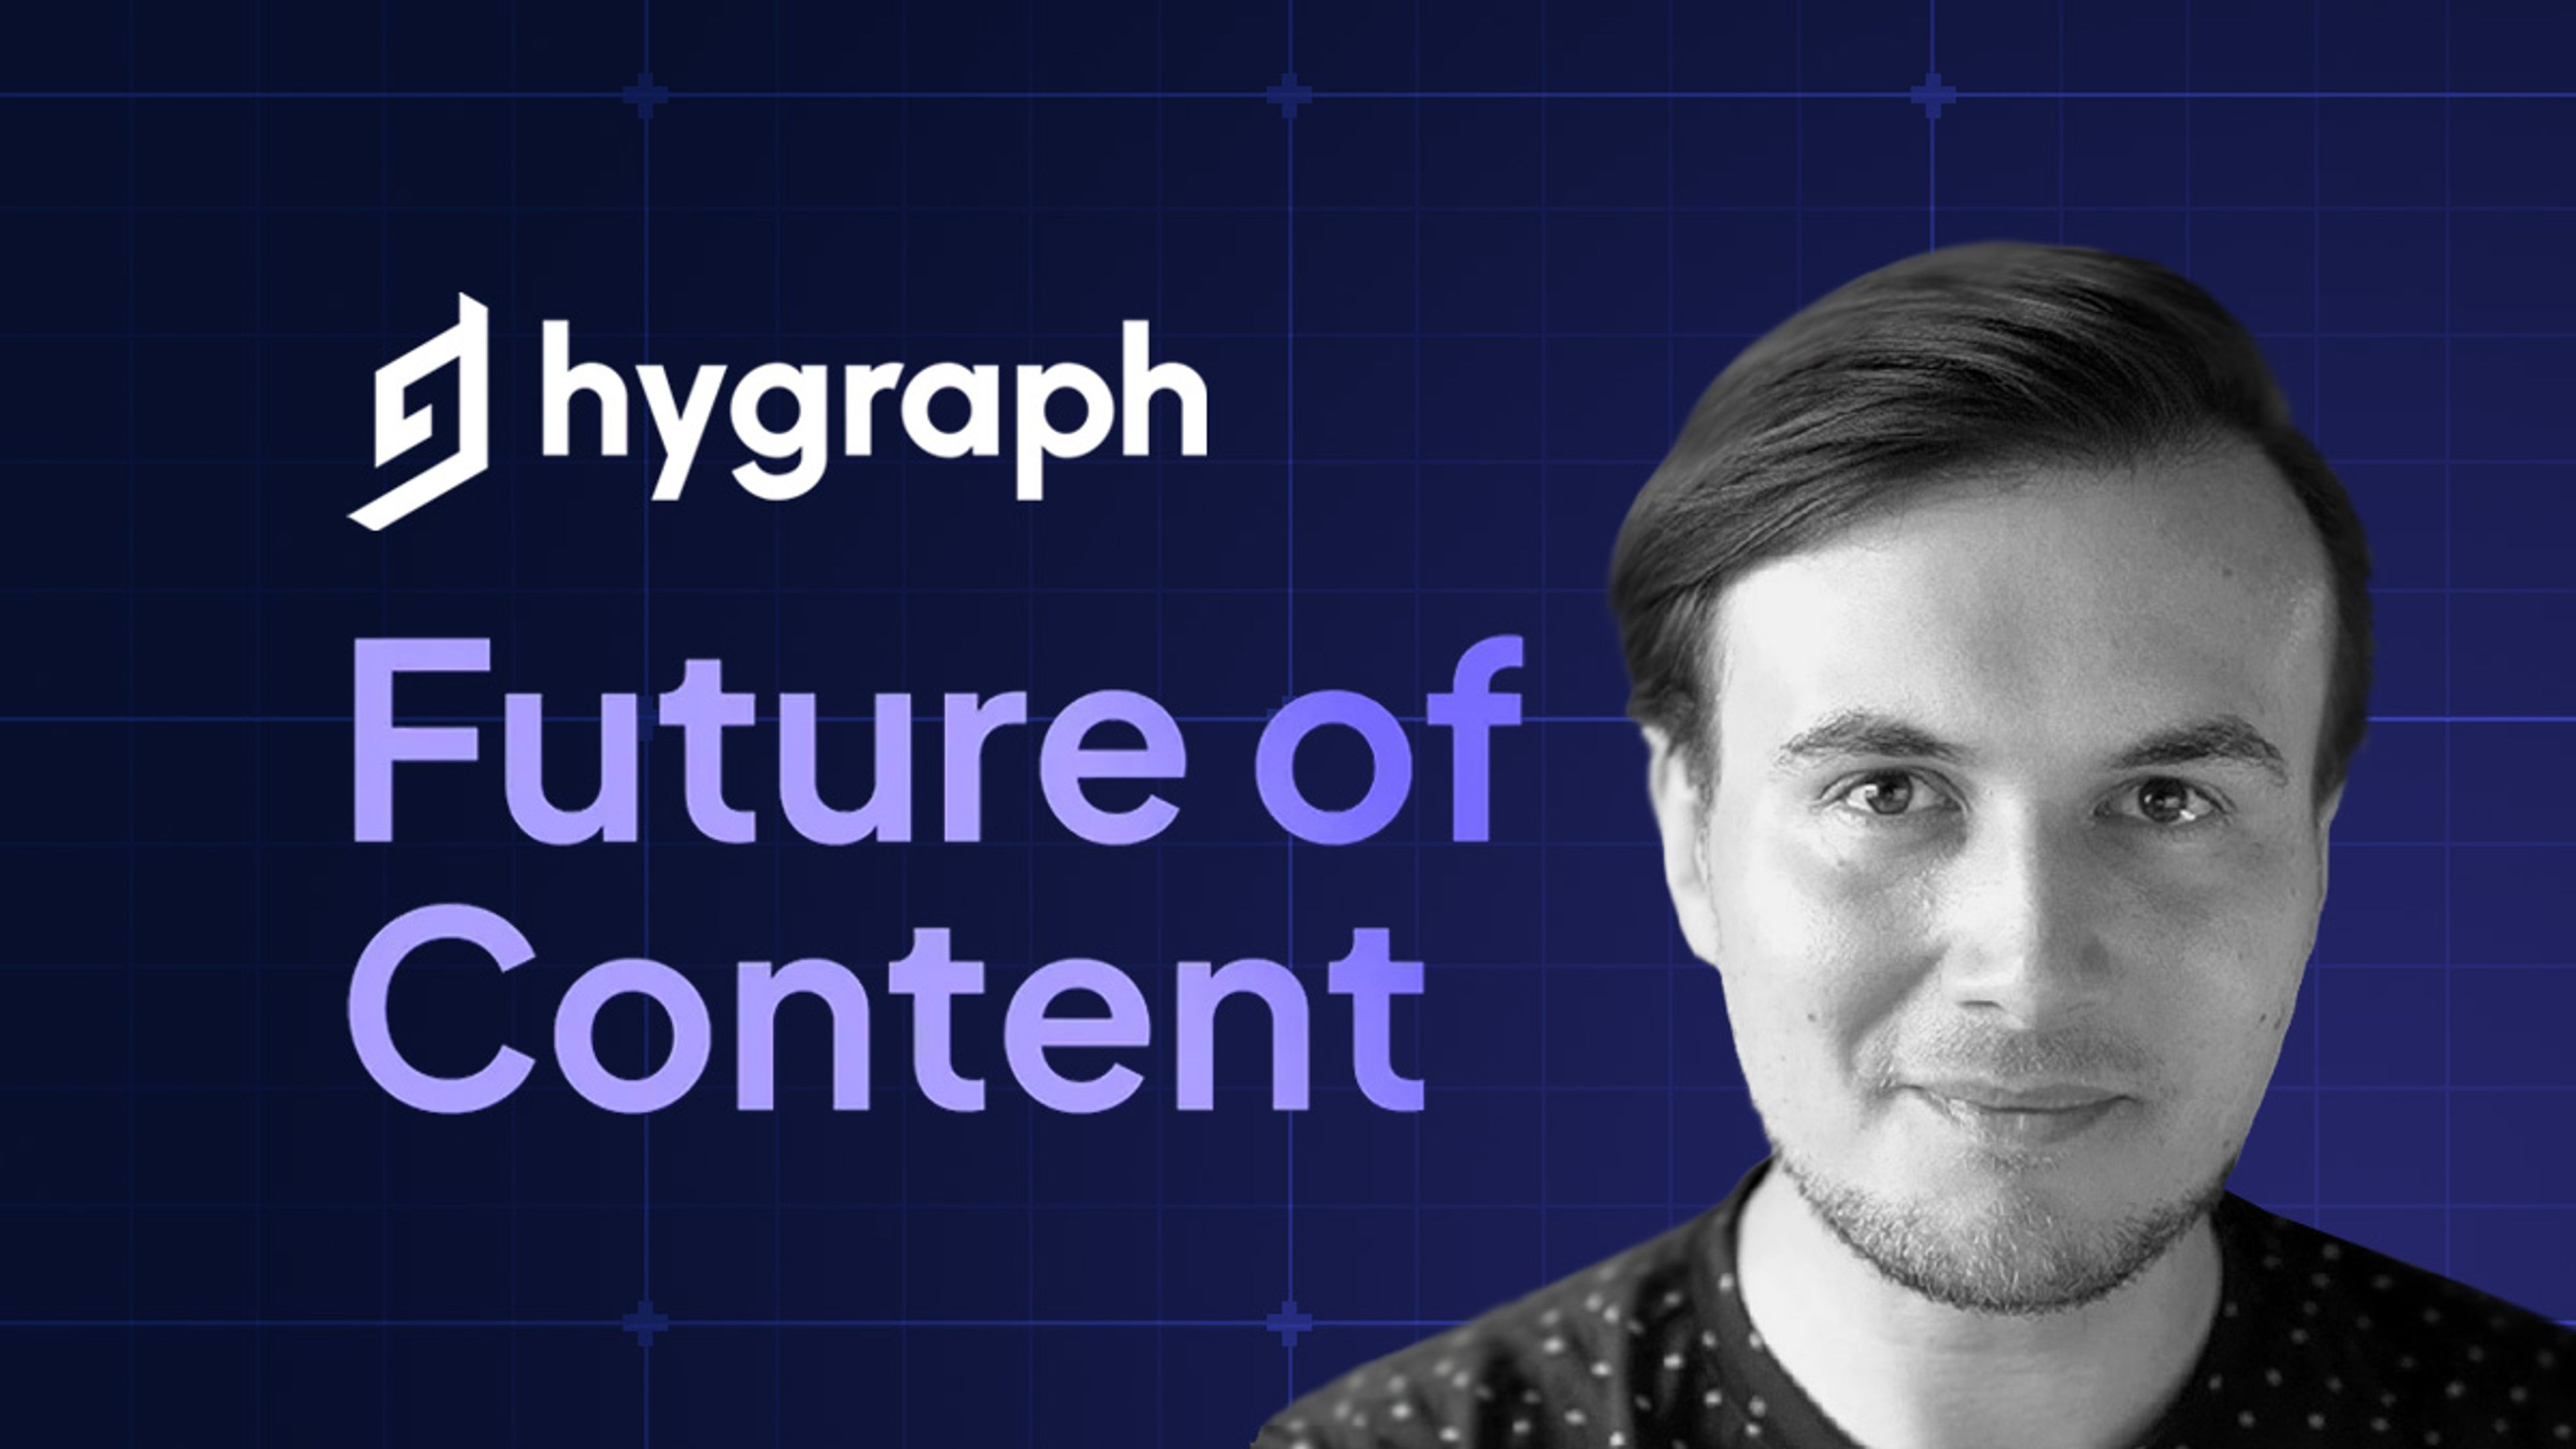 Hygraph logo with text that reads "Future of Content" with a headshot of Michael Lukaszczyk